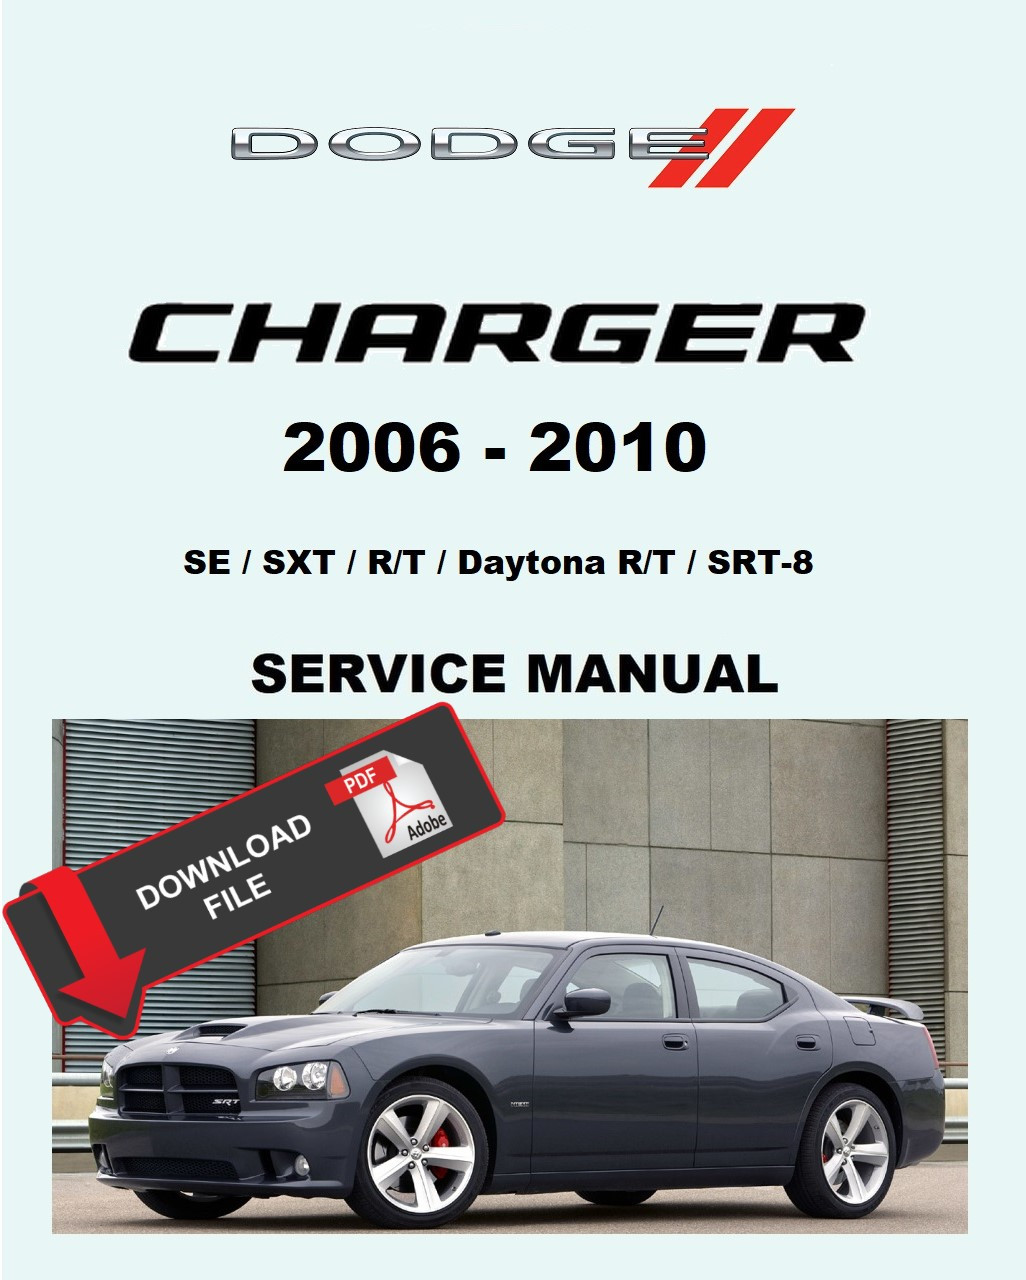 Dodge 2009 Charger Service Manual